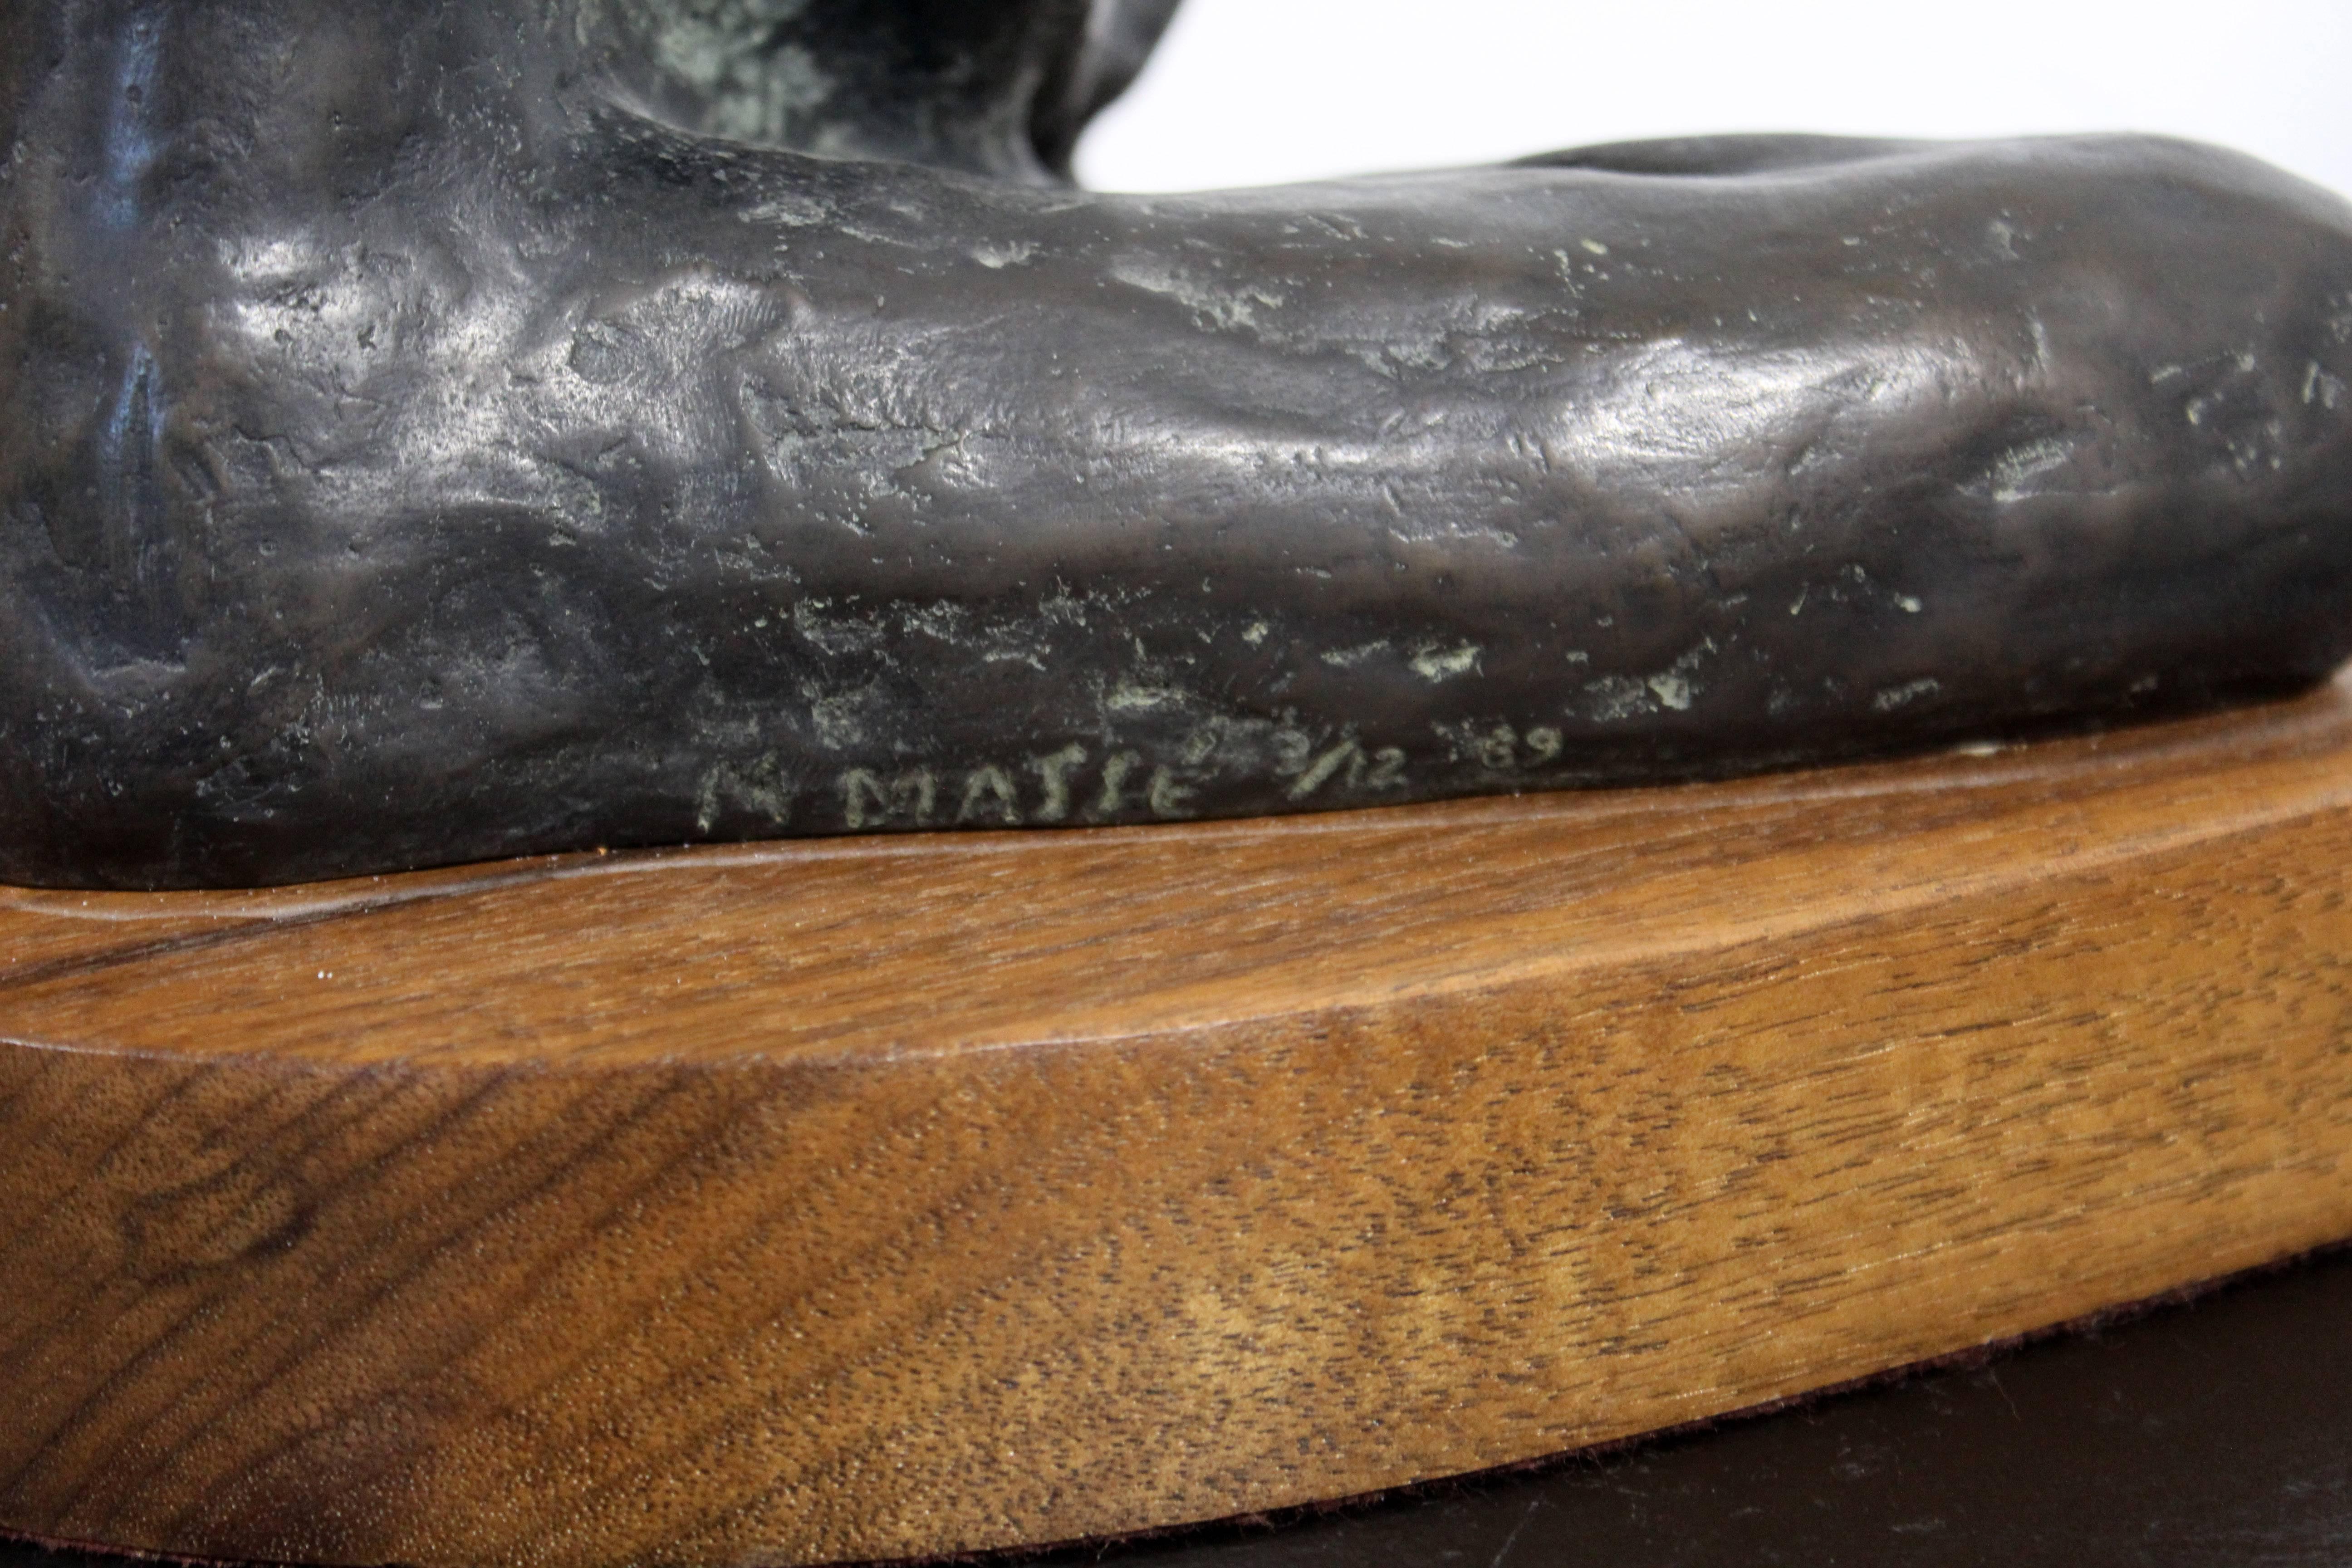 Late 20th Century Despair Bronze Figurative Table Sculpture by Charles Masse 3/12, 1989